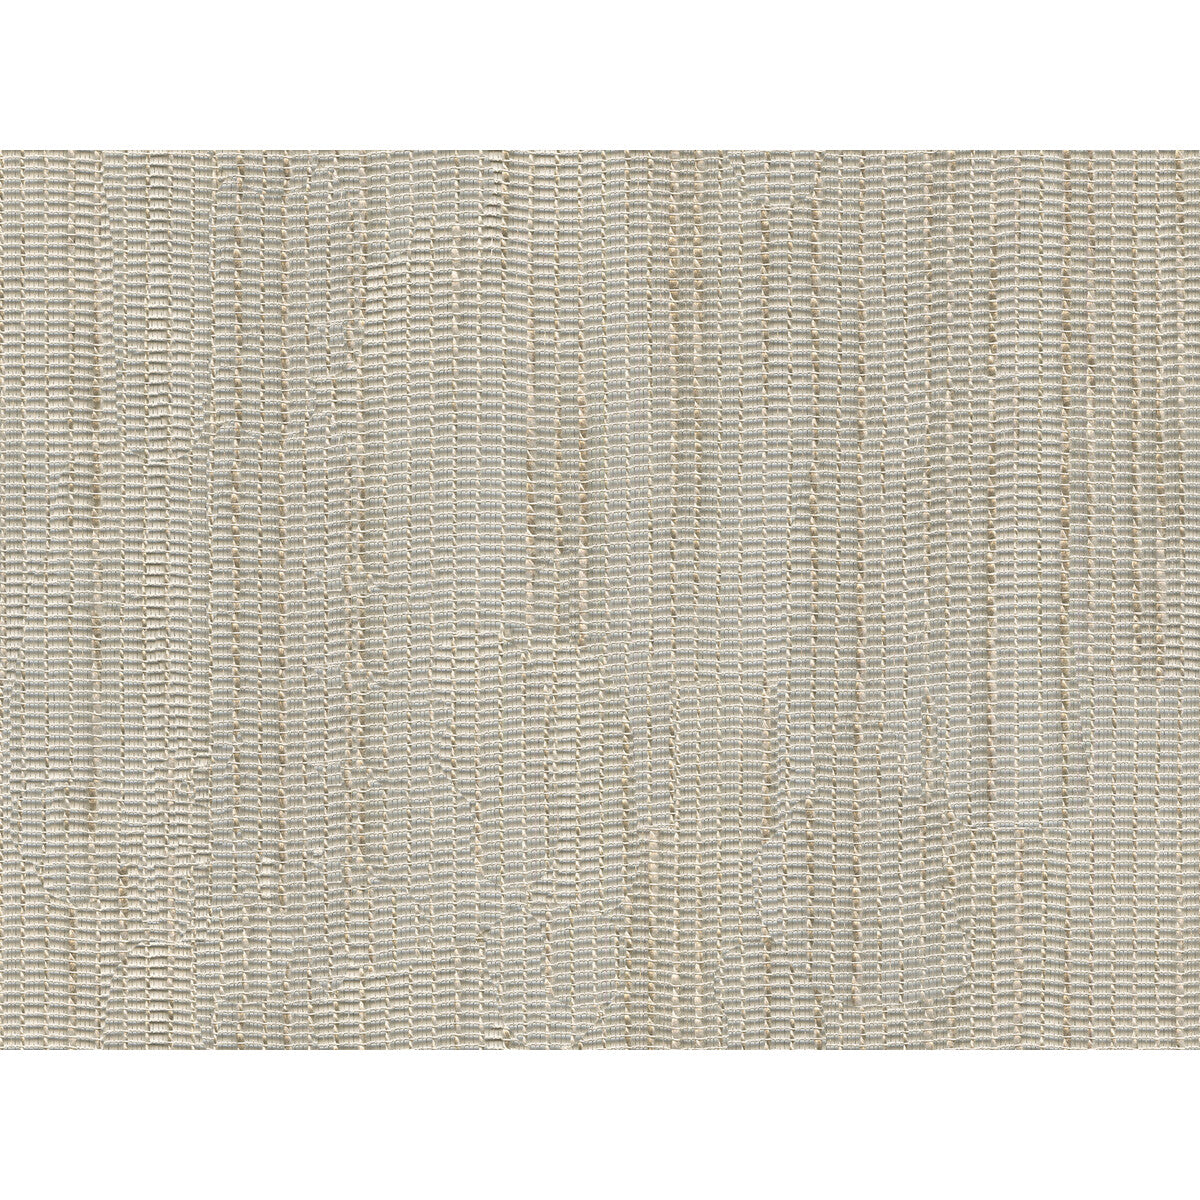 Kravet Contract fabric in 4543-116 color - pattern 4543.116.0 - by Kravet Contract